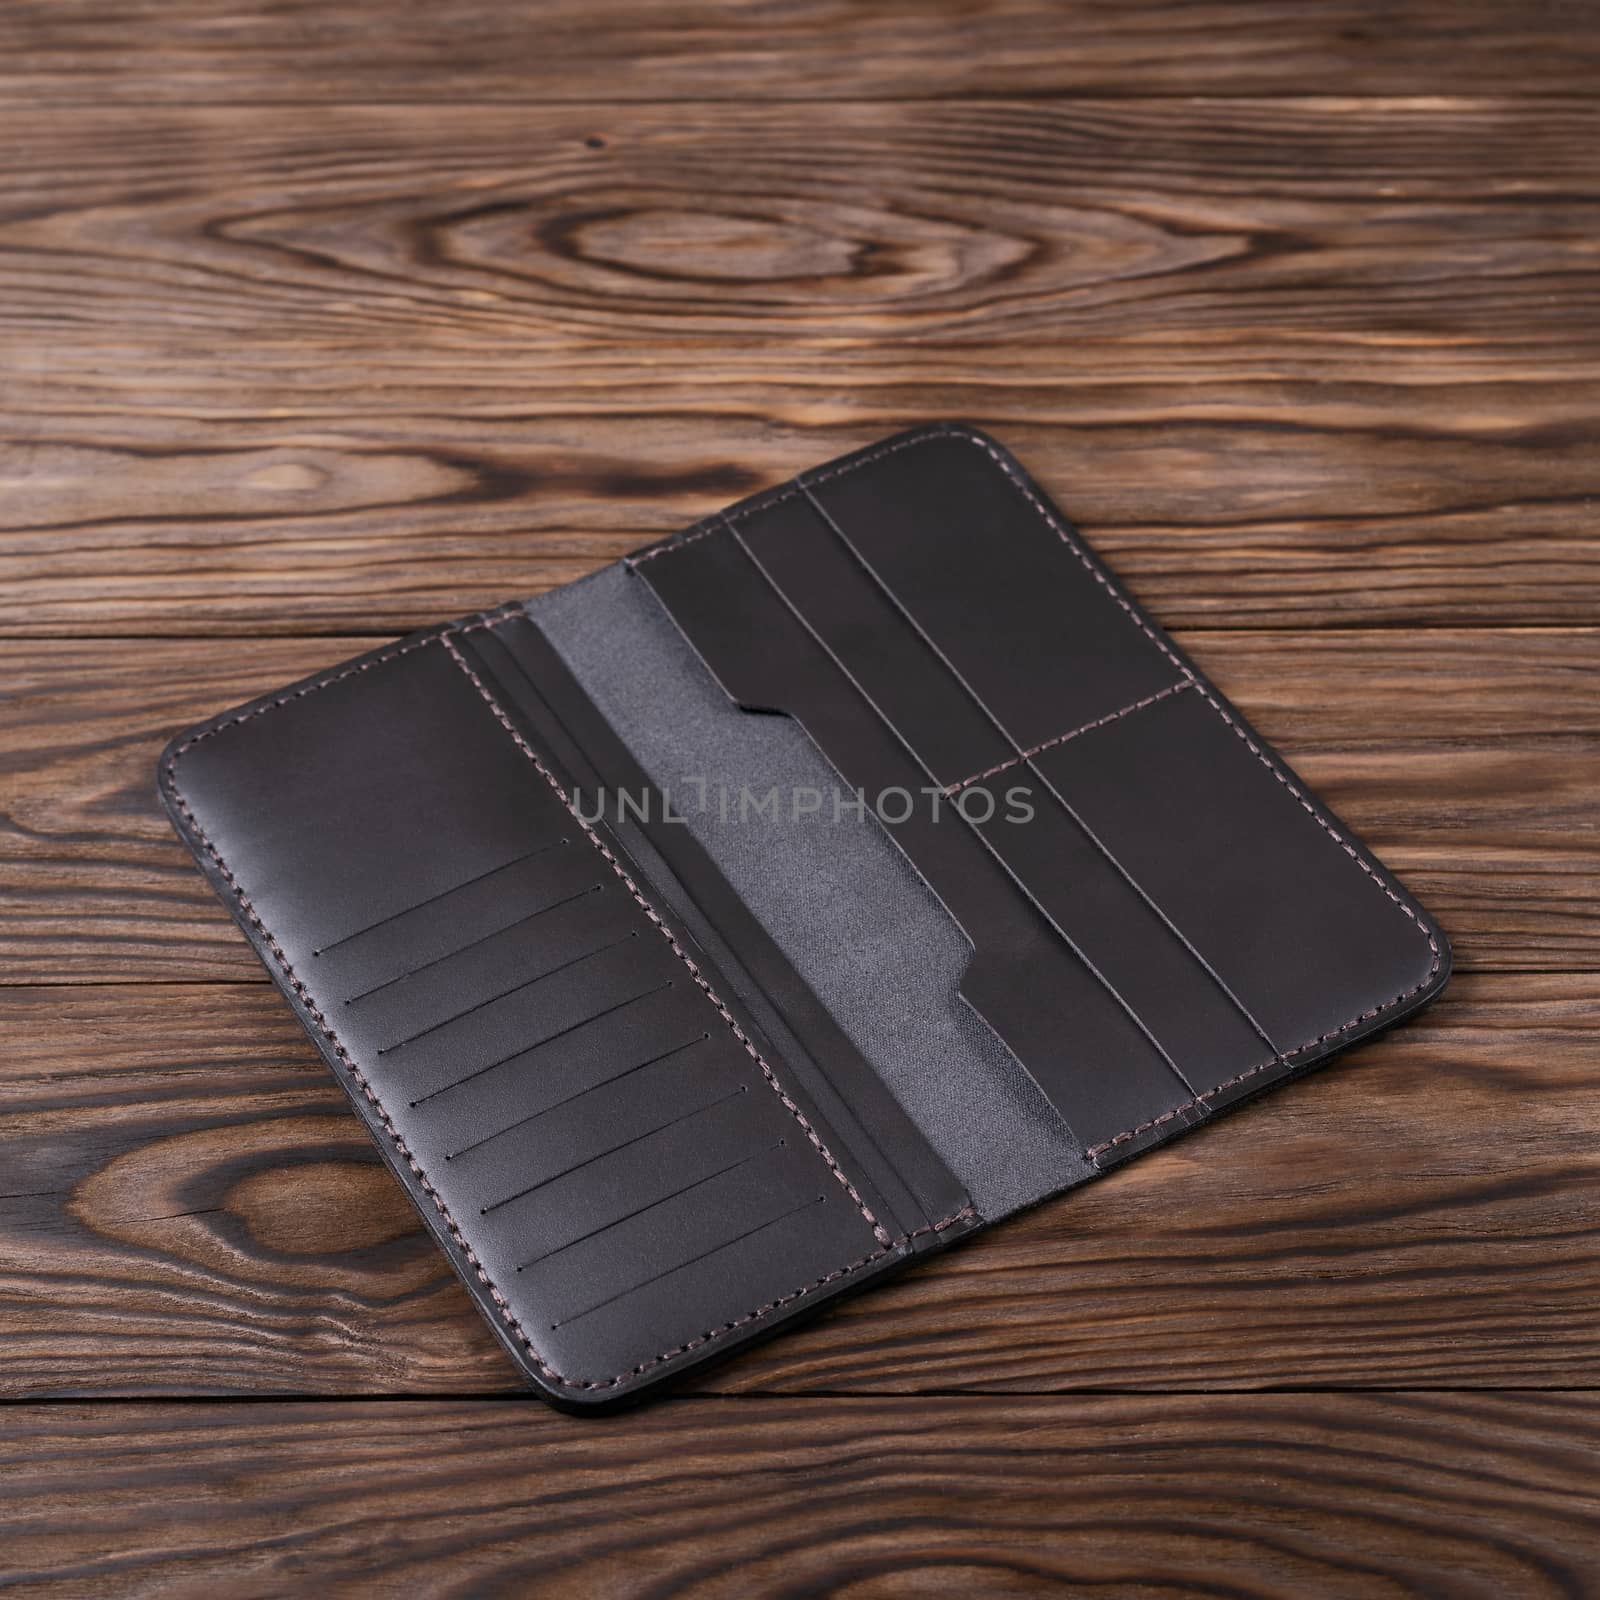 Dark blown gloss color handmade leather porte-monnaie on wooden textured background. Purse is opened and empty. Side view. Stock photo of luxury accessories.